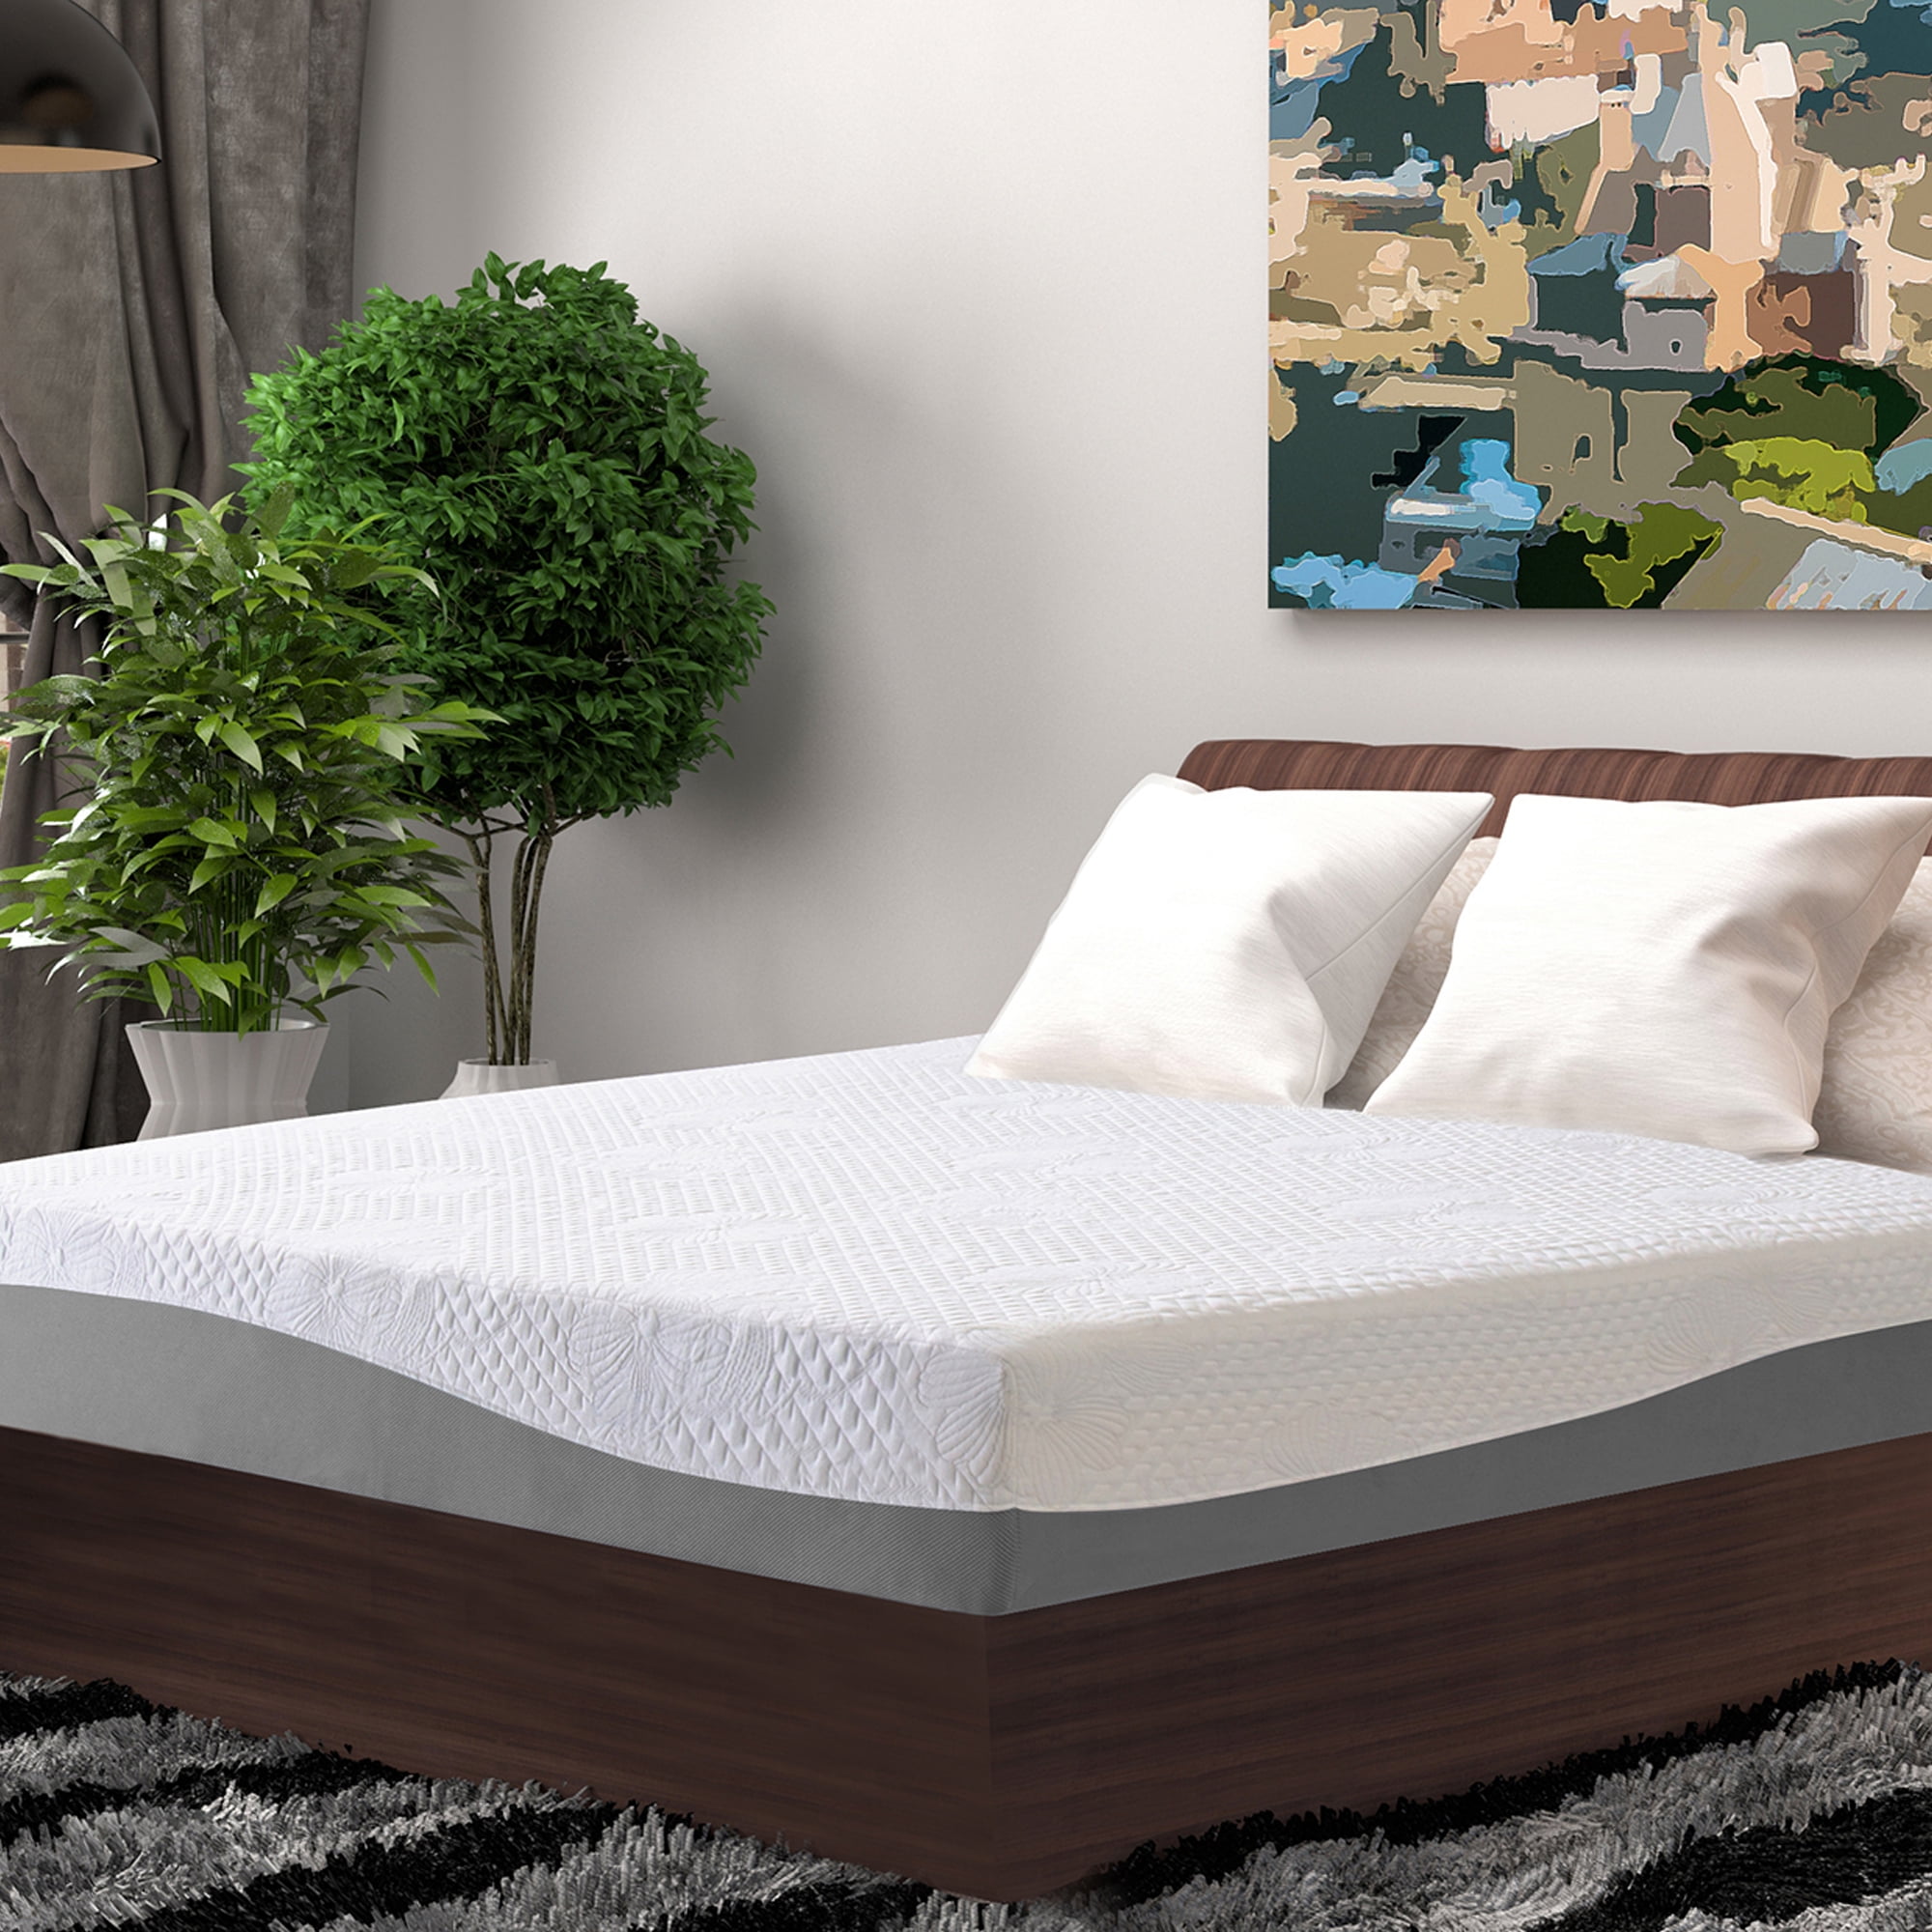 Details about   10 Inch Full Size Memory Foam Bed Mattress With More Pressure Relief & Support 